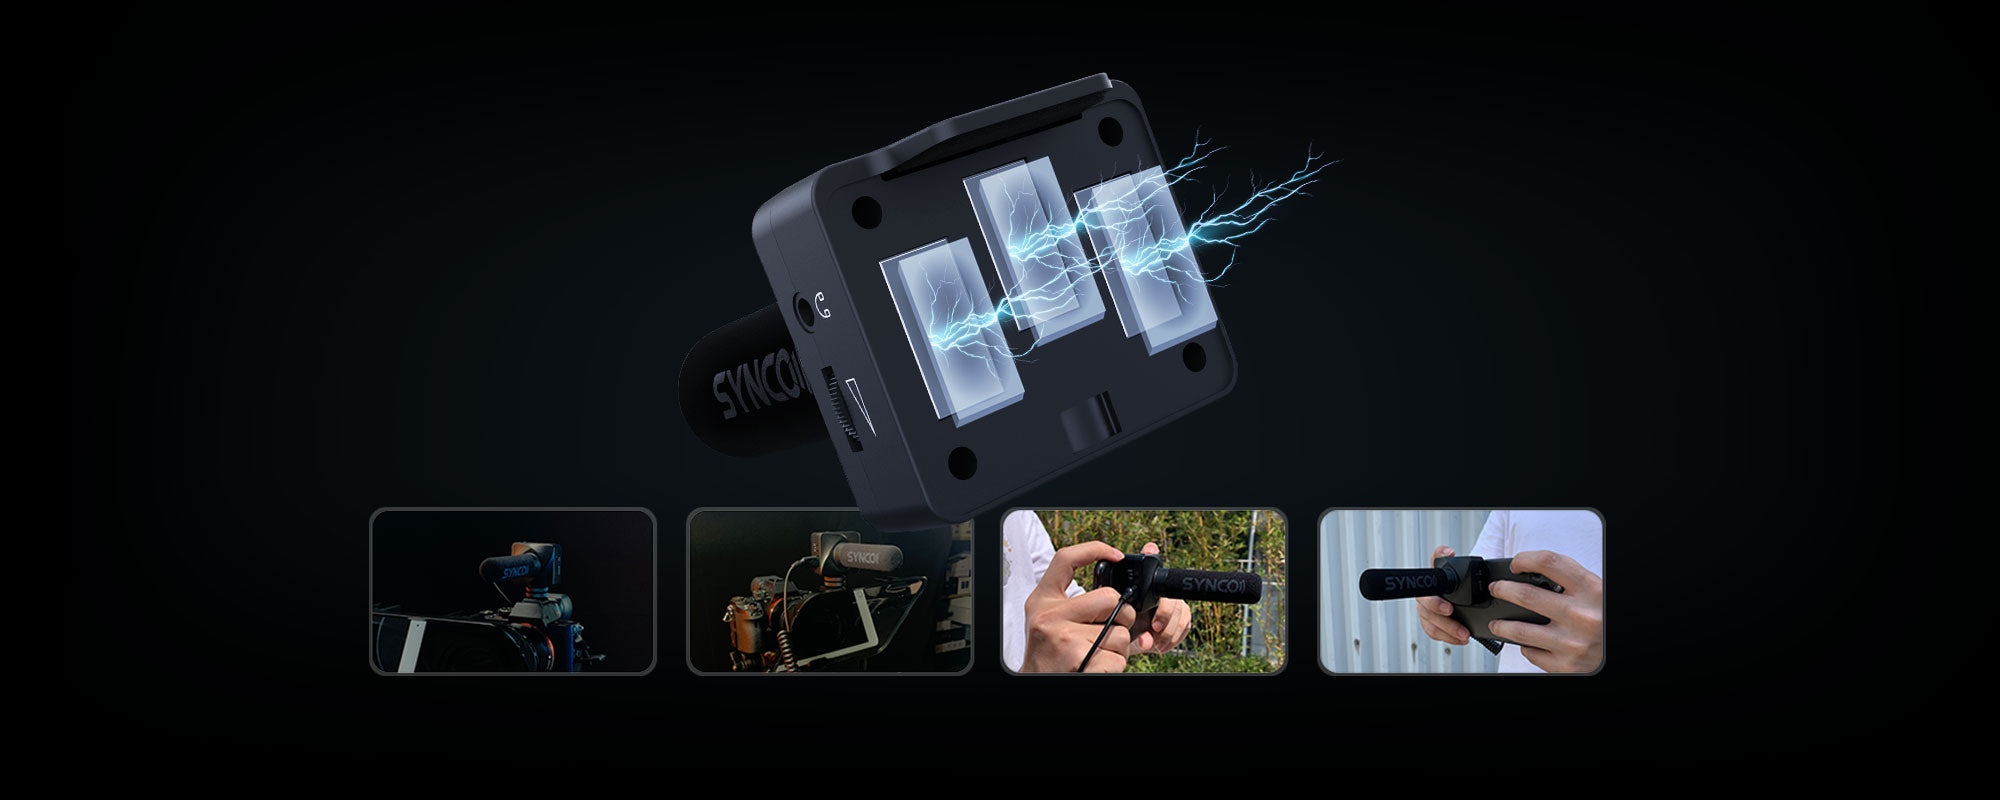 SYNCO U3 features magnetic absorption to attach firmly to smartphones and can also mount on cameras.